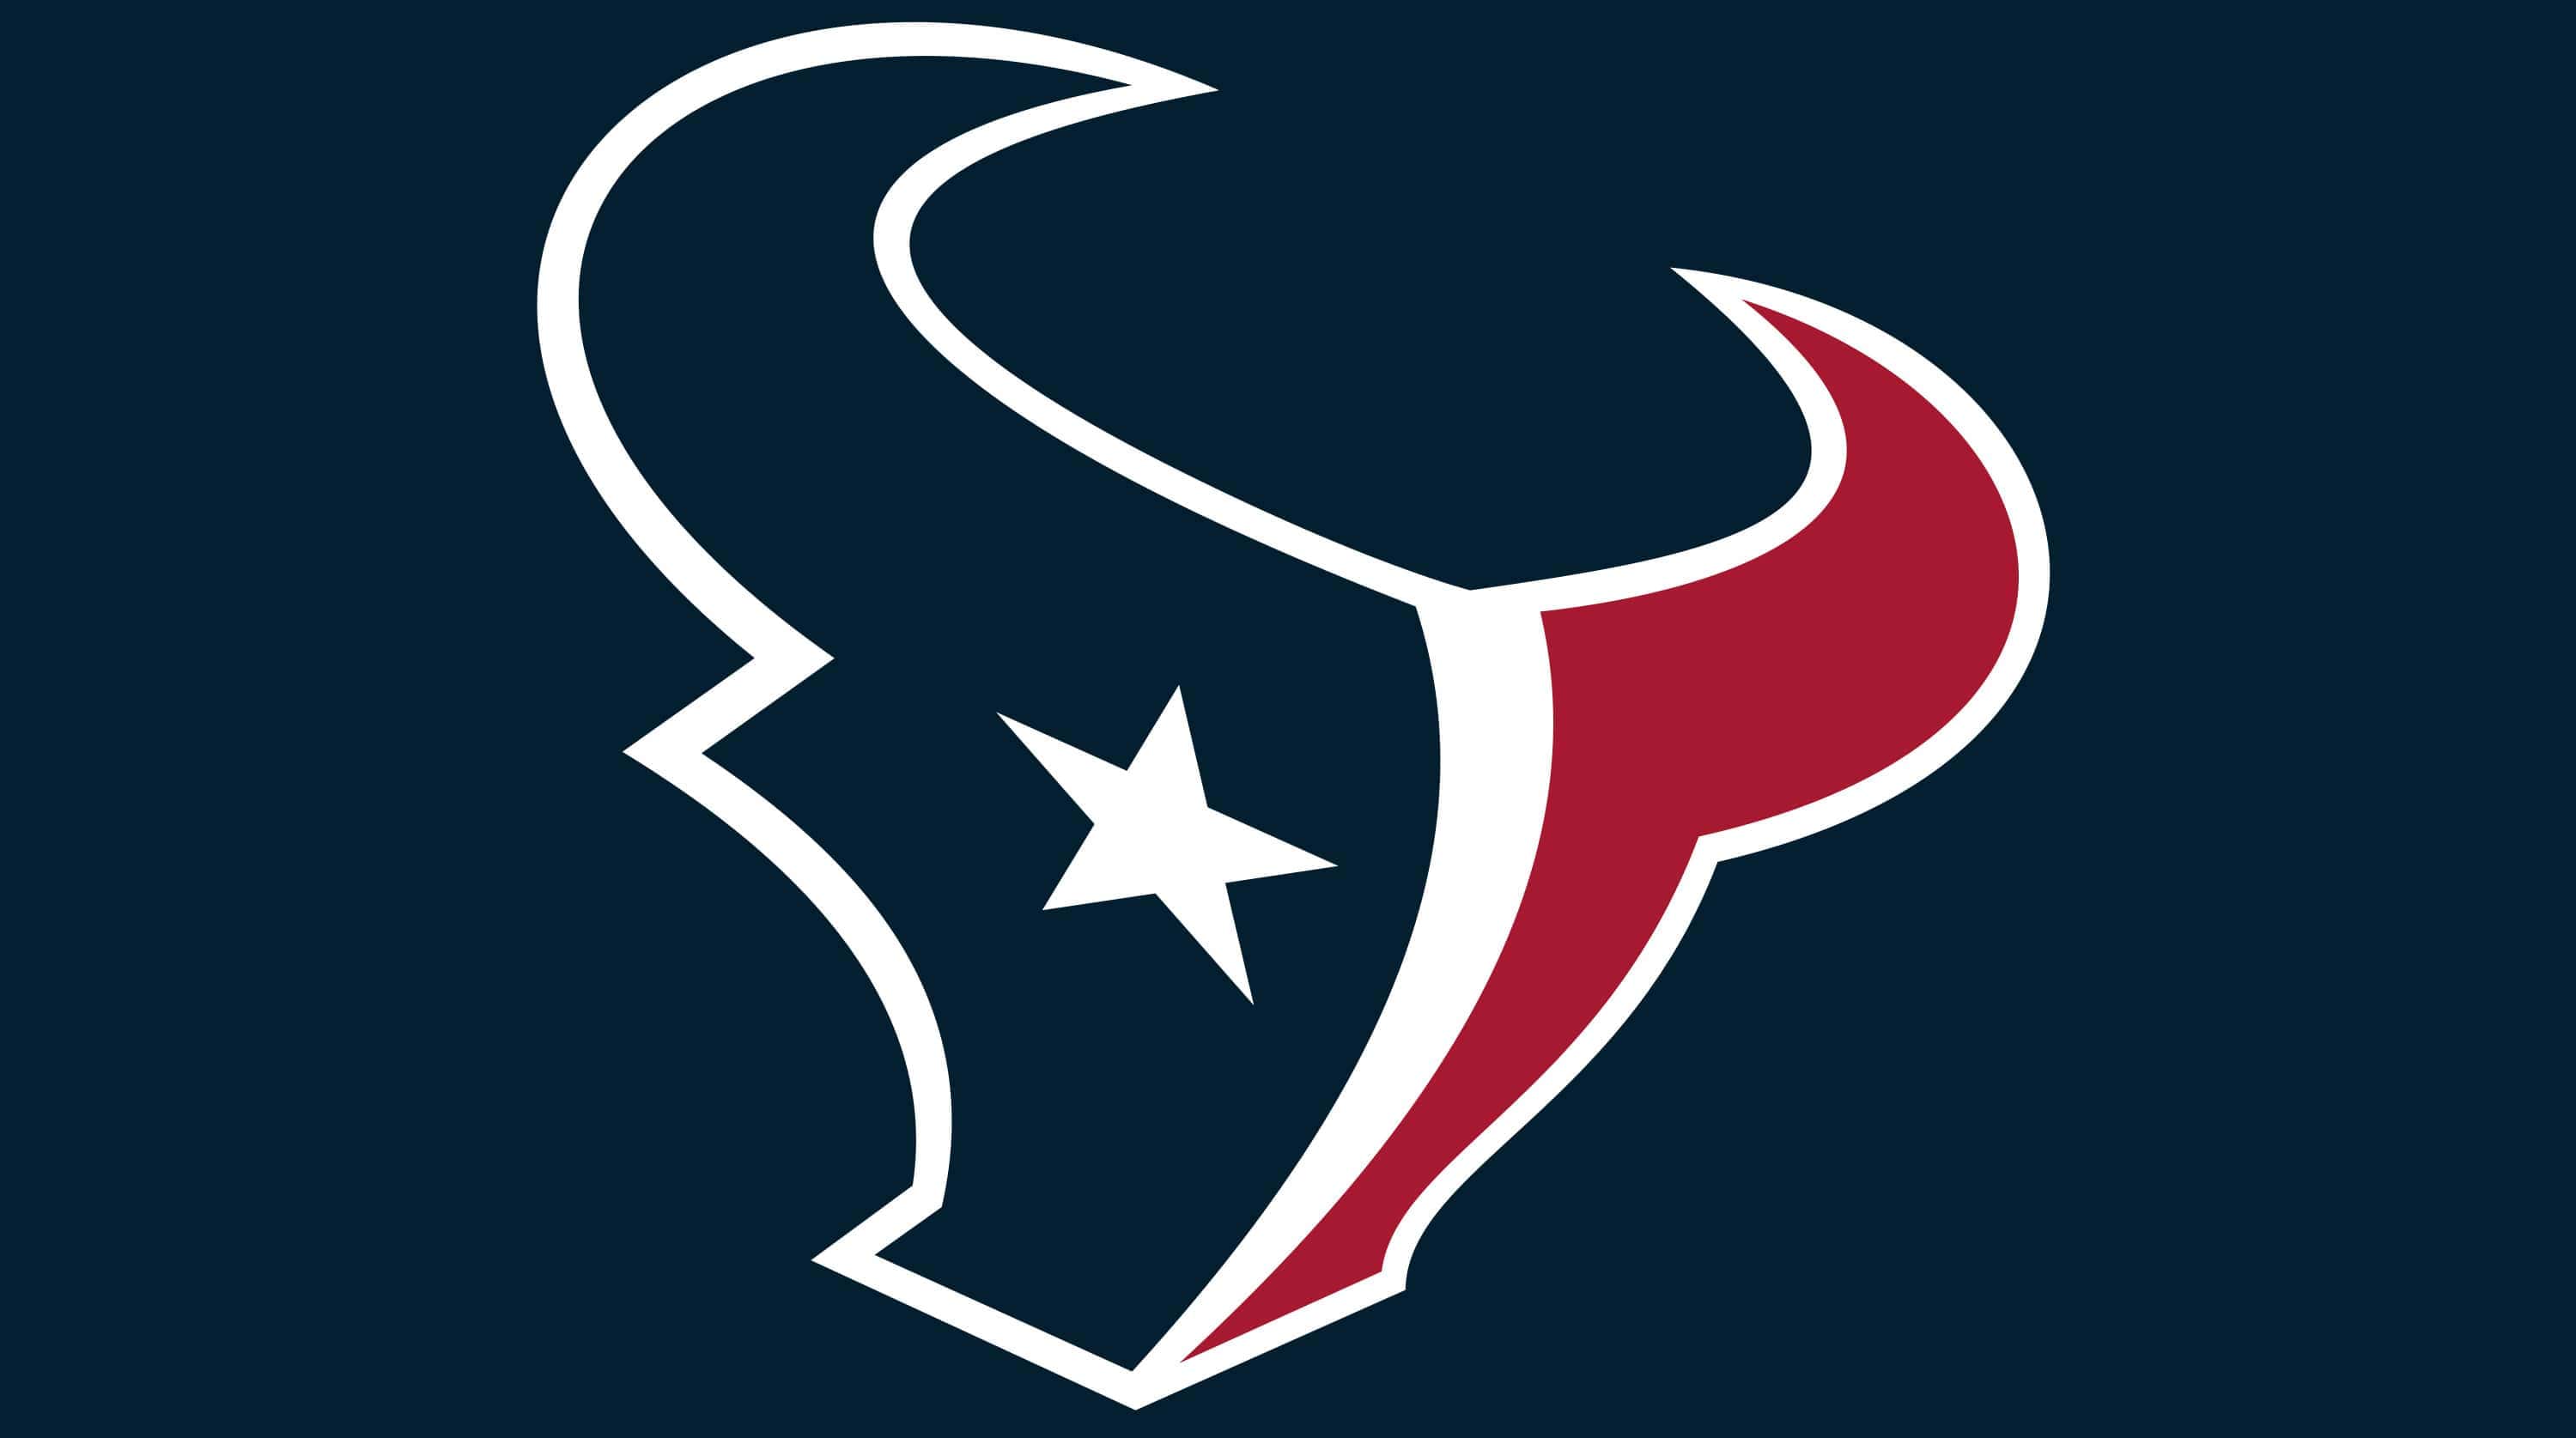 2. NFL Houston Texans Nail Art Decals - wide 6